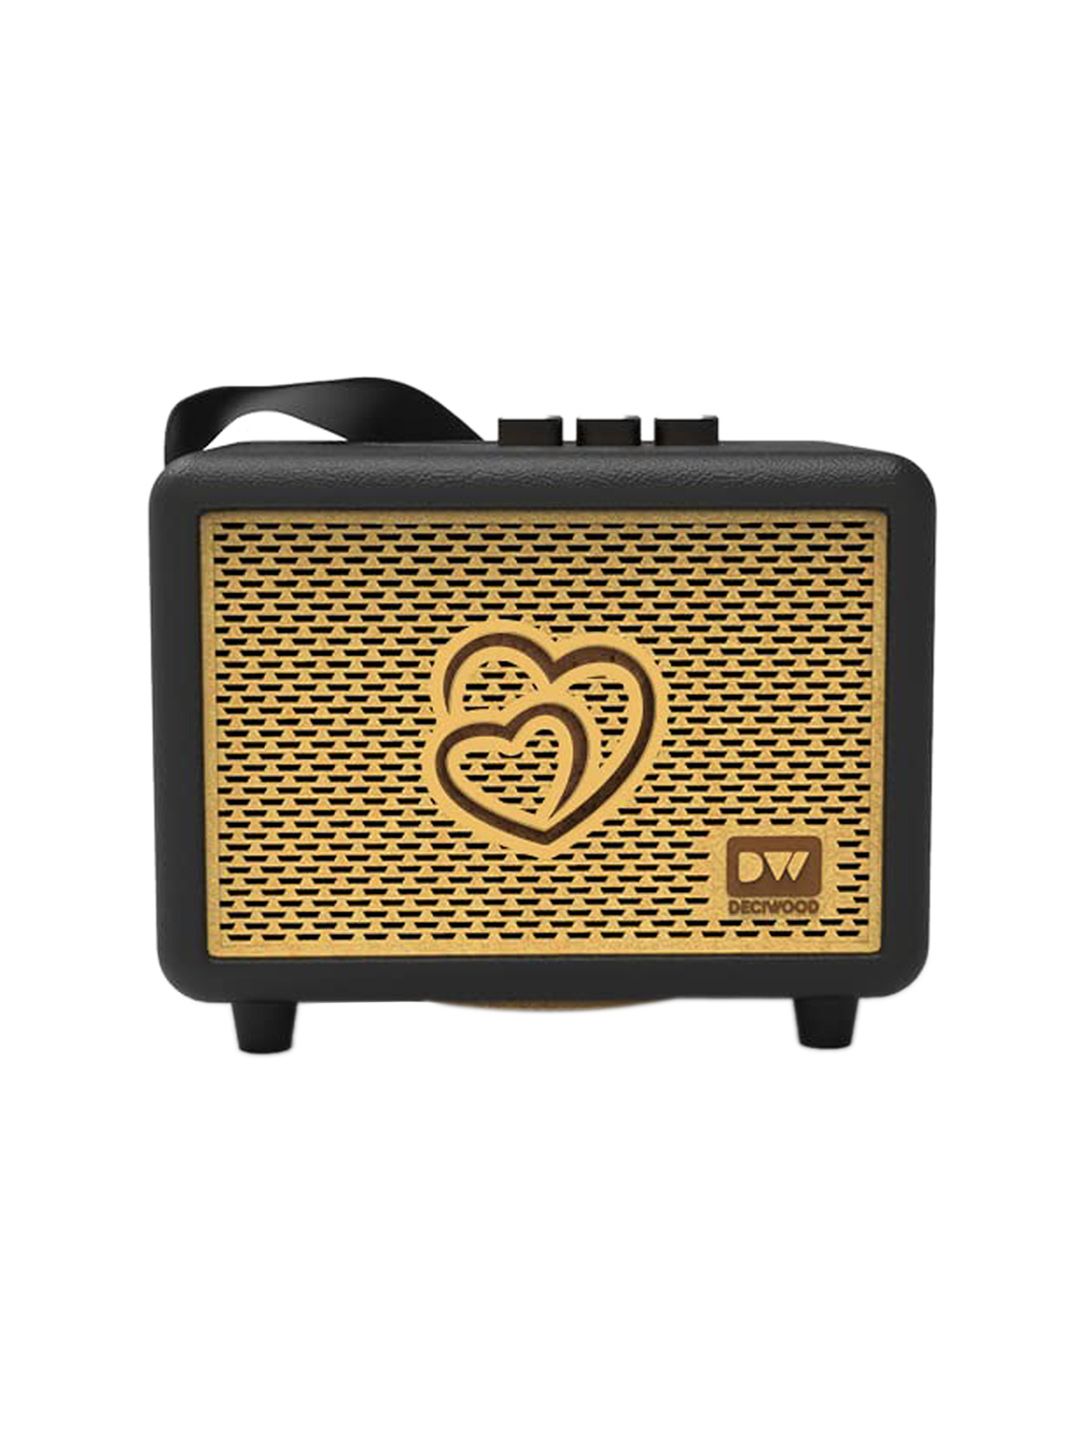 DECIWOOD Black Solid Curved 25W Wooden Portable Bluetooth Speaker Price in India